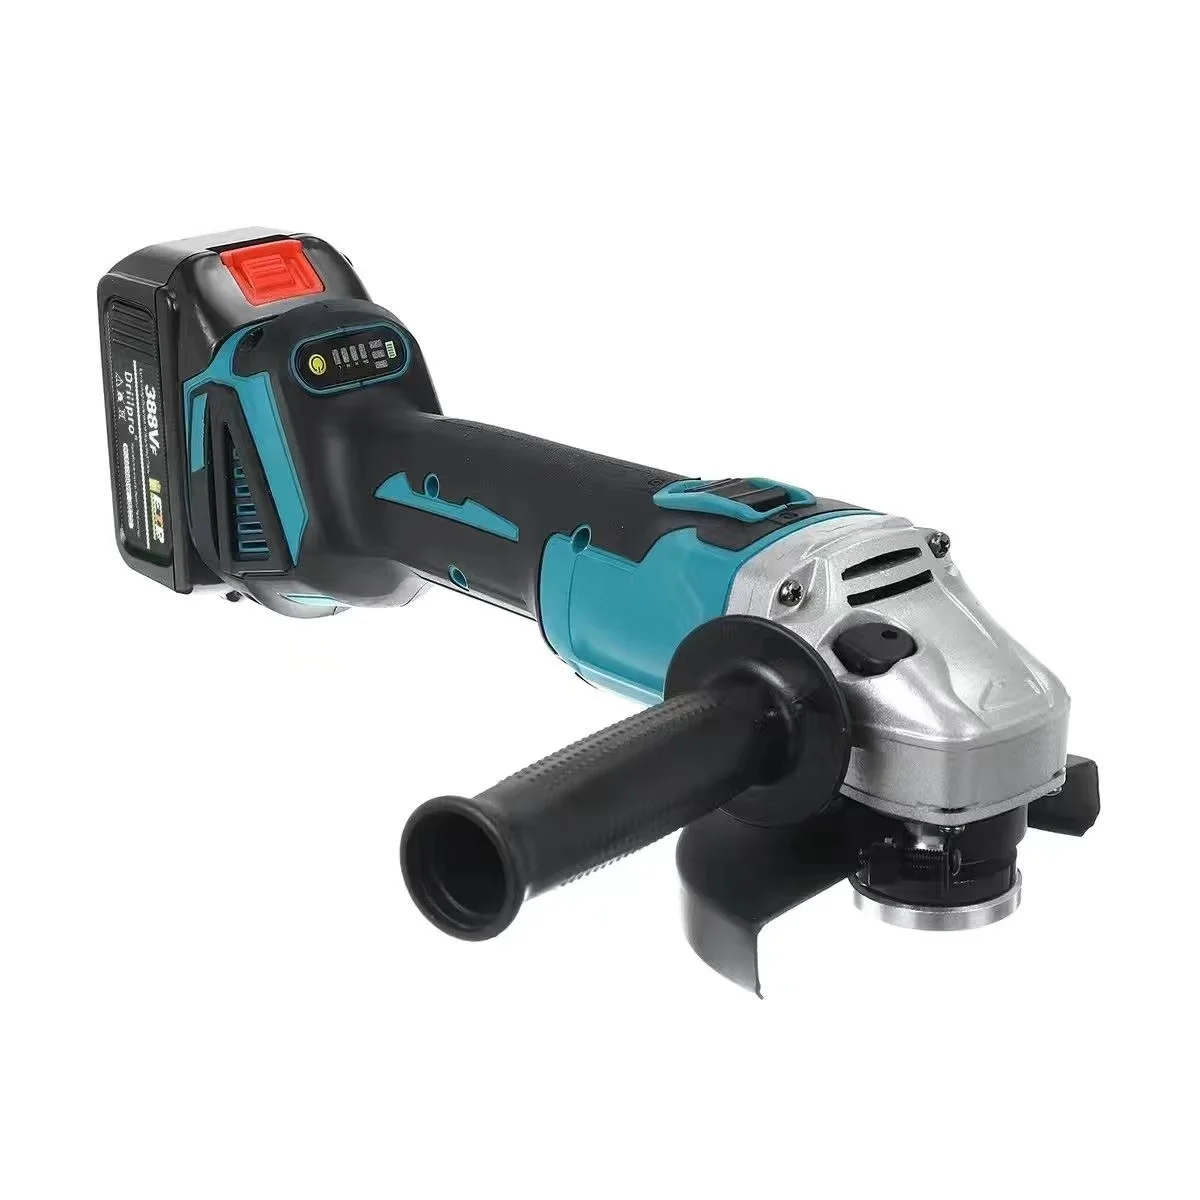 18V 100mm Brushless Impact Angle Grinder Cordless Cutting Machine Polisher Power Tools compatible For Makita Battery portable spot welding burner small electric welding machine 936wb lithium battery impact welding machine battery spot welding310